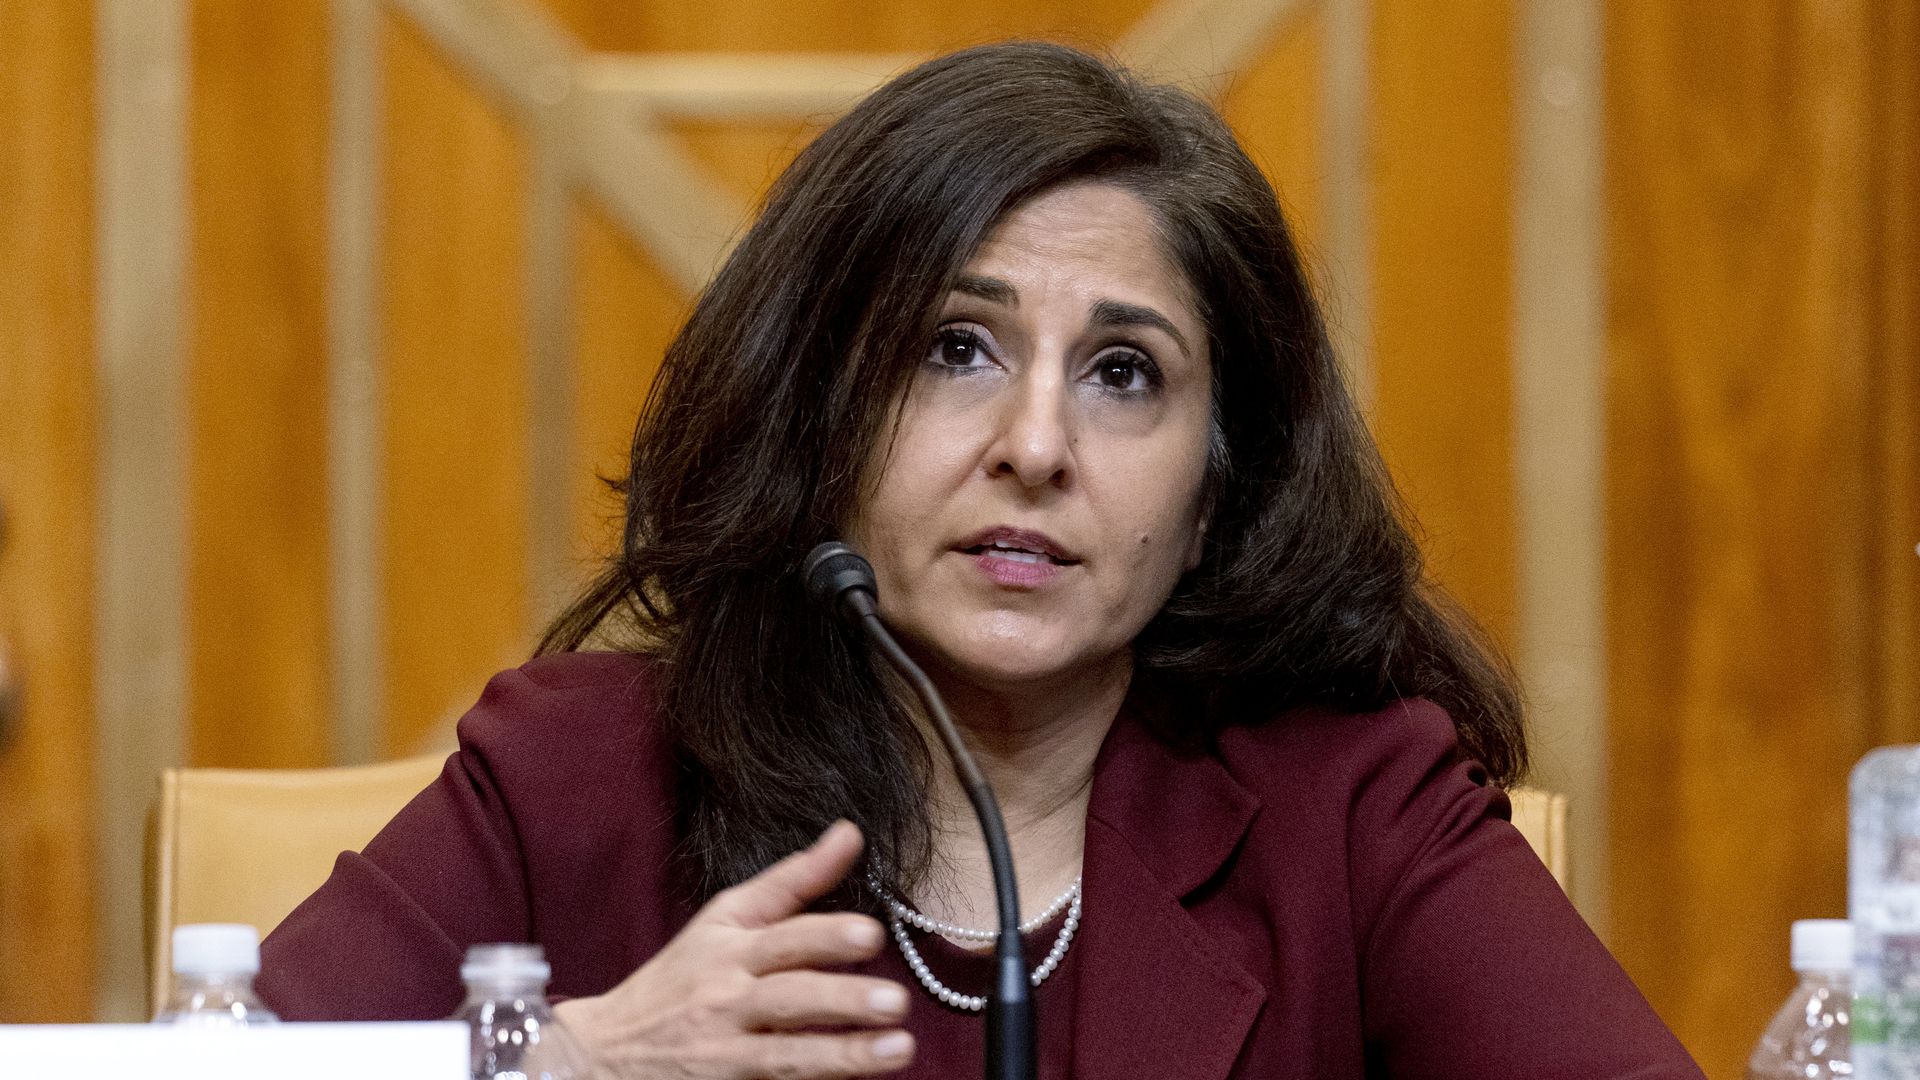 Neera Tanden during a confirmation hearing in Washington, D.C., U.S., on Wednesday, Feb. 10, 2021